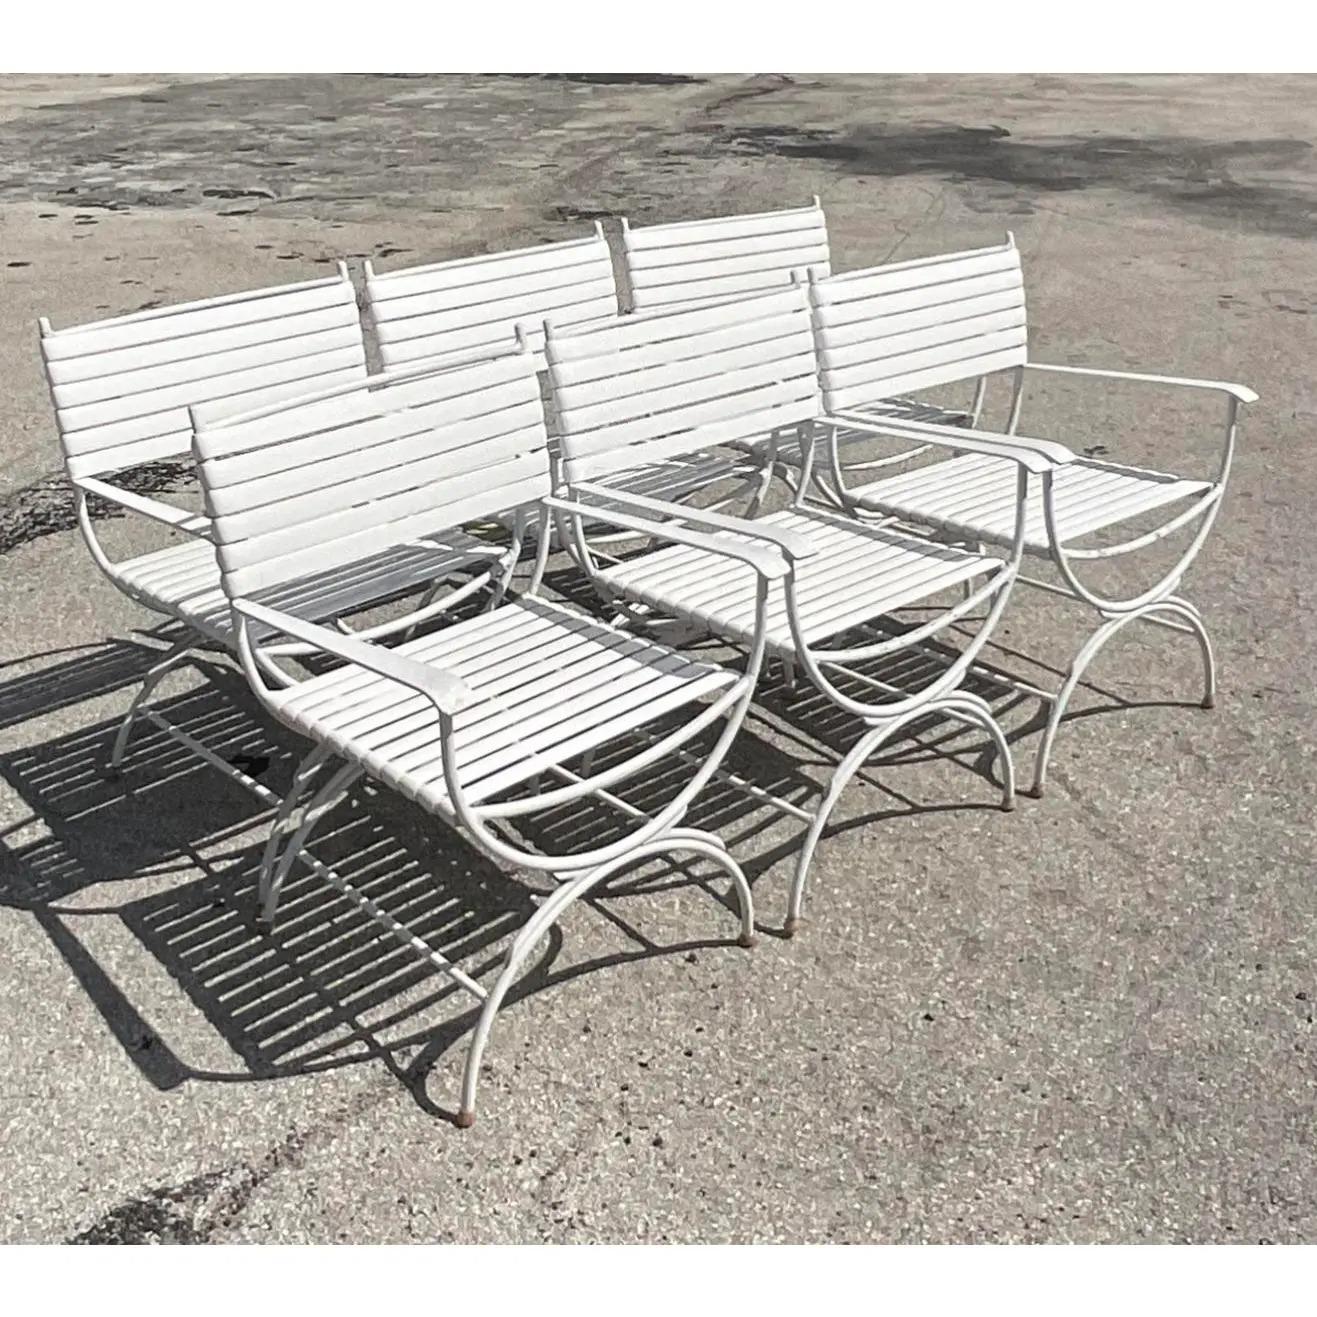 Fantastic set of six banded outdoor chairs. Made by the legendary Keller Scroll of Miami. Beautiful Midcentury wrought iron design. Matching table also available. Acquired from a Palm Beach estate.